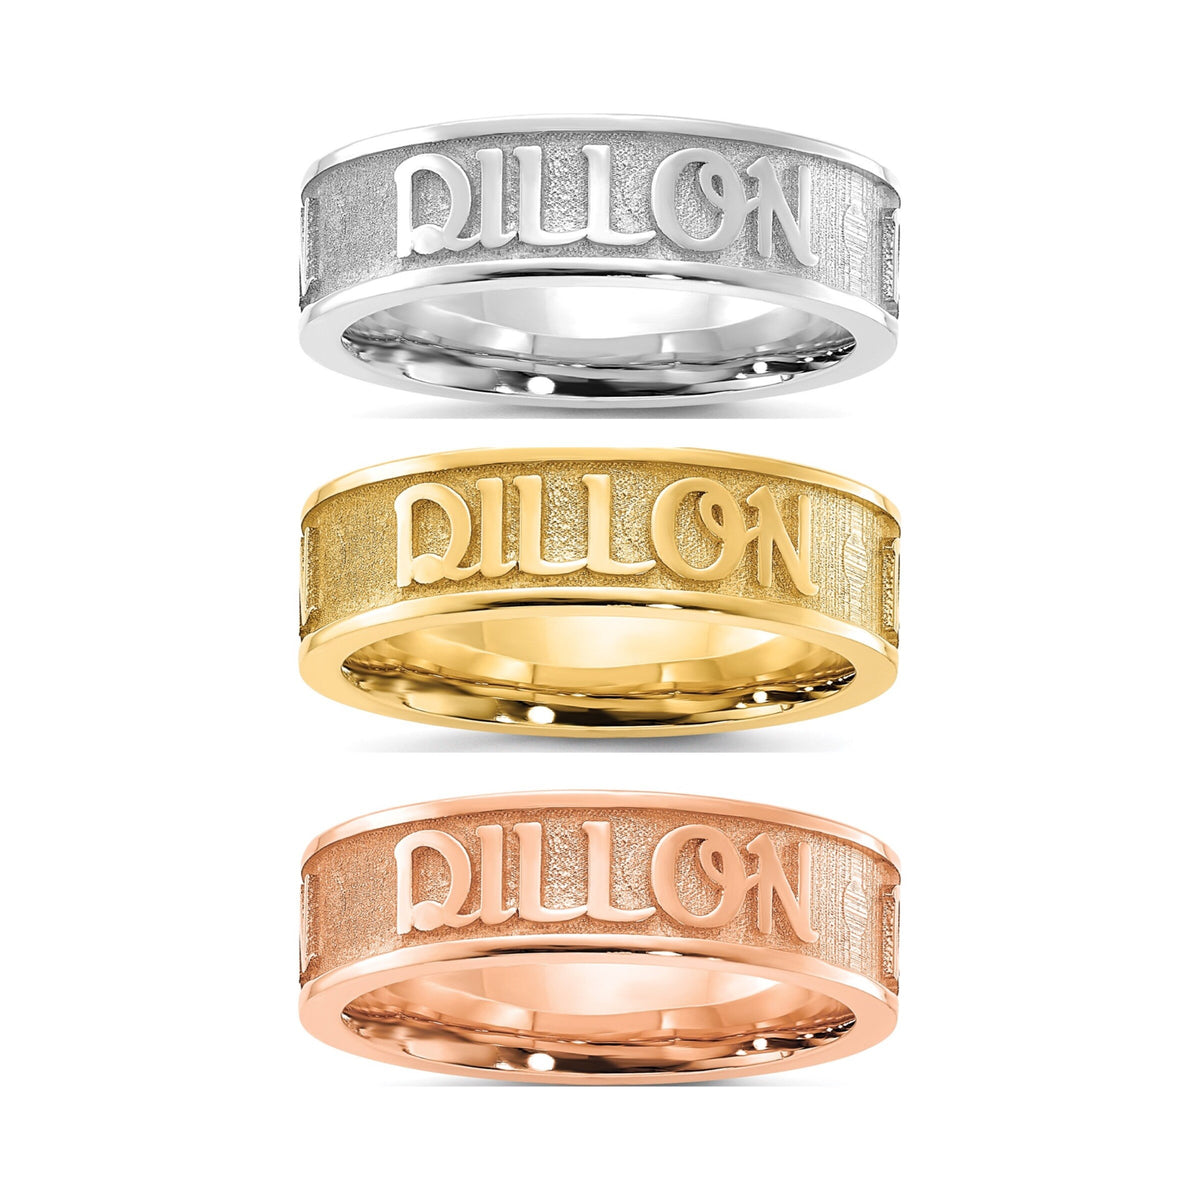 Custom Name Ring 10k Yellow Gold, 10k White Gold & Rose Gold, Sterling Silver Gift Box Included / Ring Sizes 5-9 /  Metal Weight 5-6.5 Grams